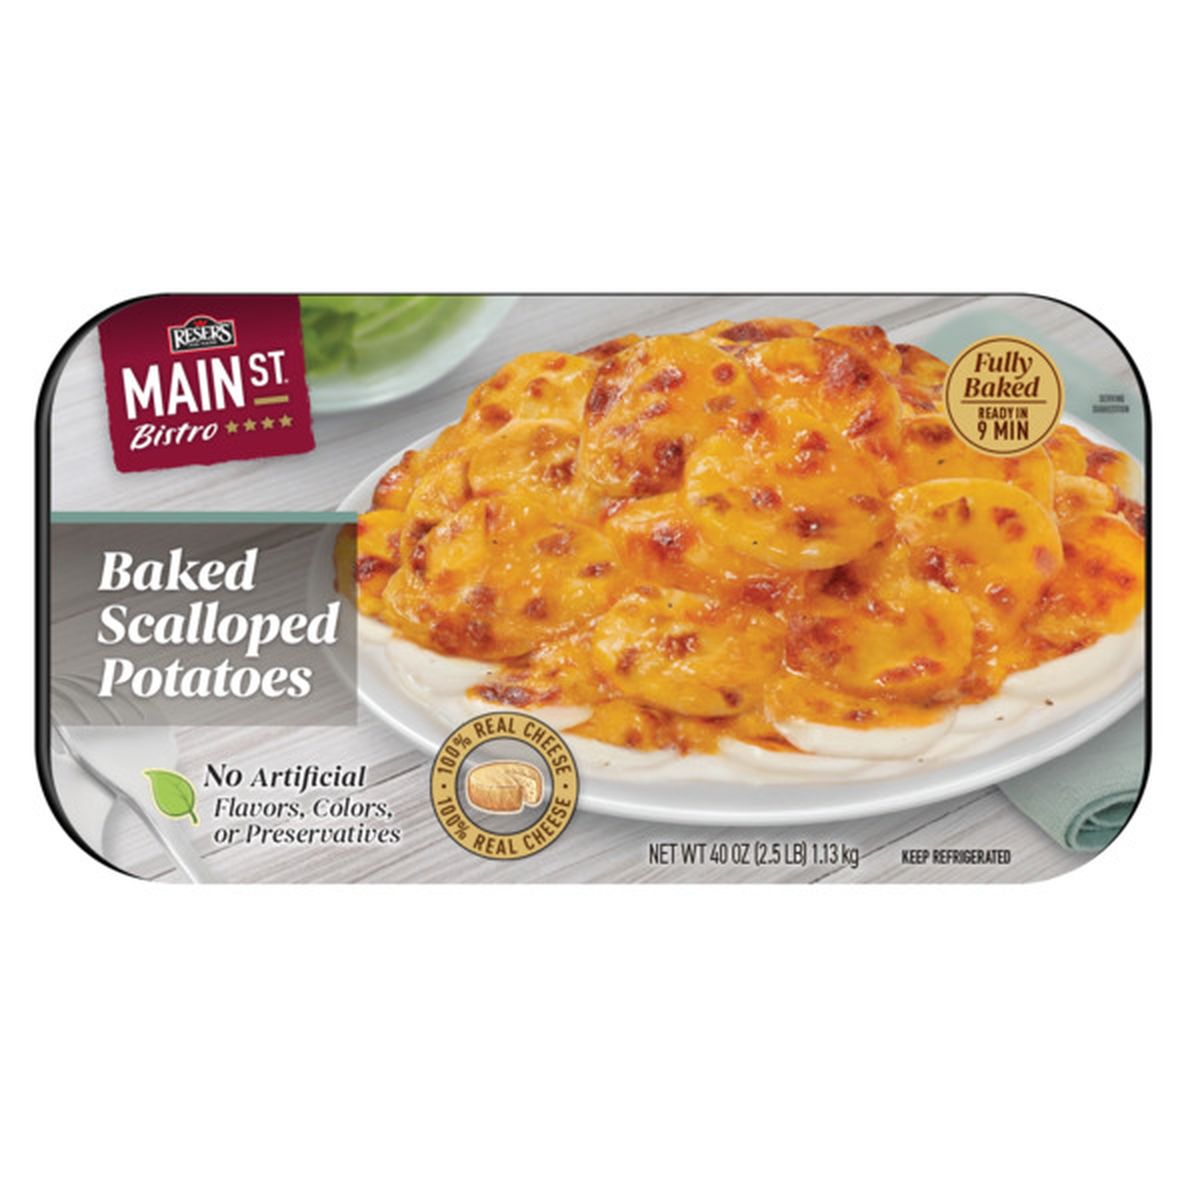 Main St Bistro Baked Scalloped Potatoes at Costco 